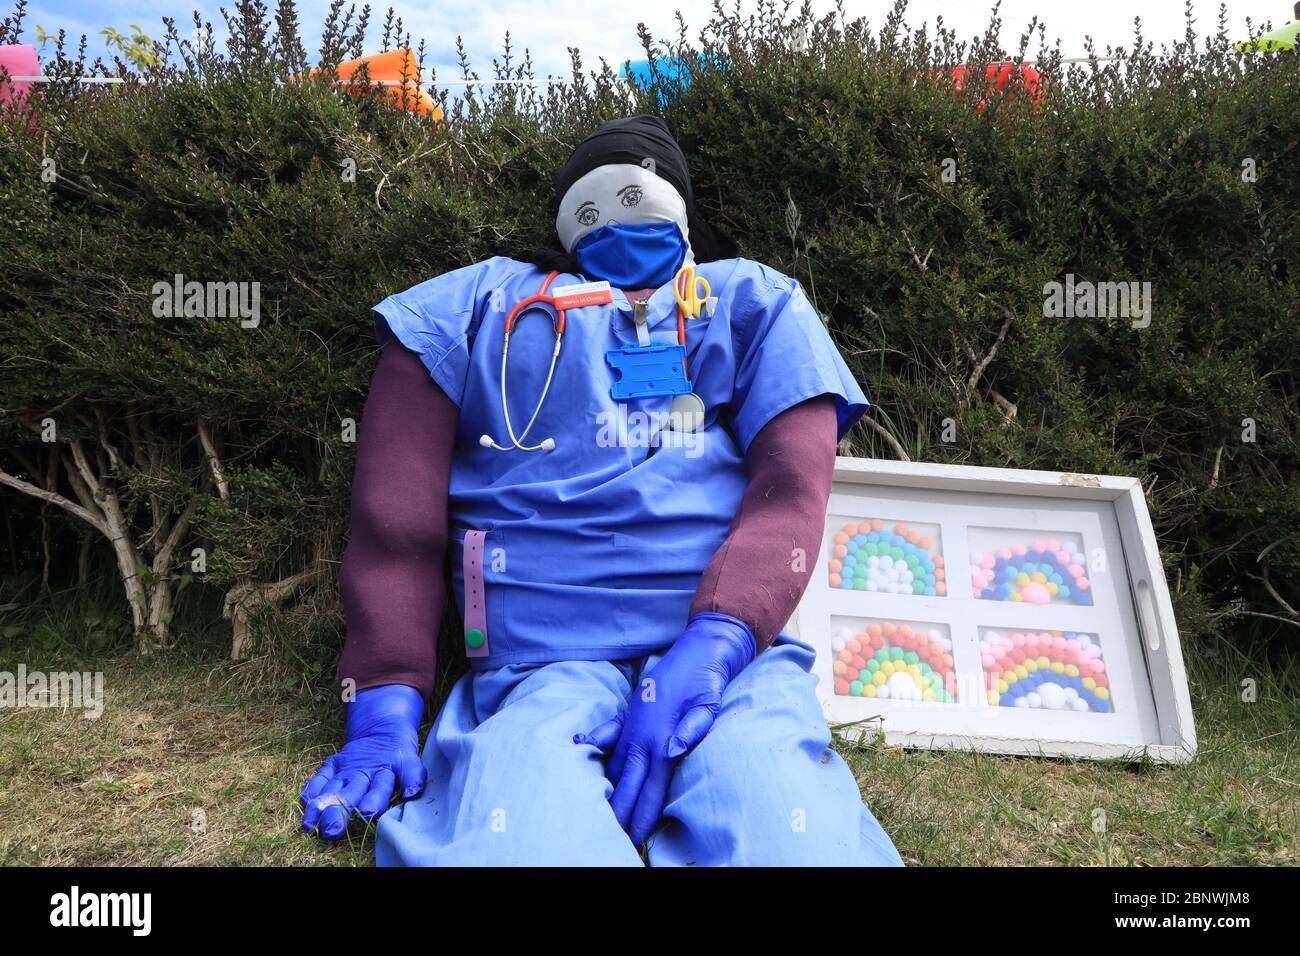 Kilkhampton, North Cornwall, UK. 16th May, 2020. The villagers of Kilkhampton in Cornwall have been paying tribute to keyworkers during the Coronavirus crisis, in their own distinctive way, by creatinga huge assortment of themed scarecrows: Credit: Natasha Quarmby/Alamy Live News Stock Photo